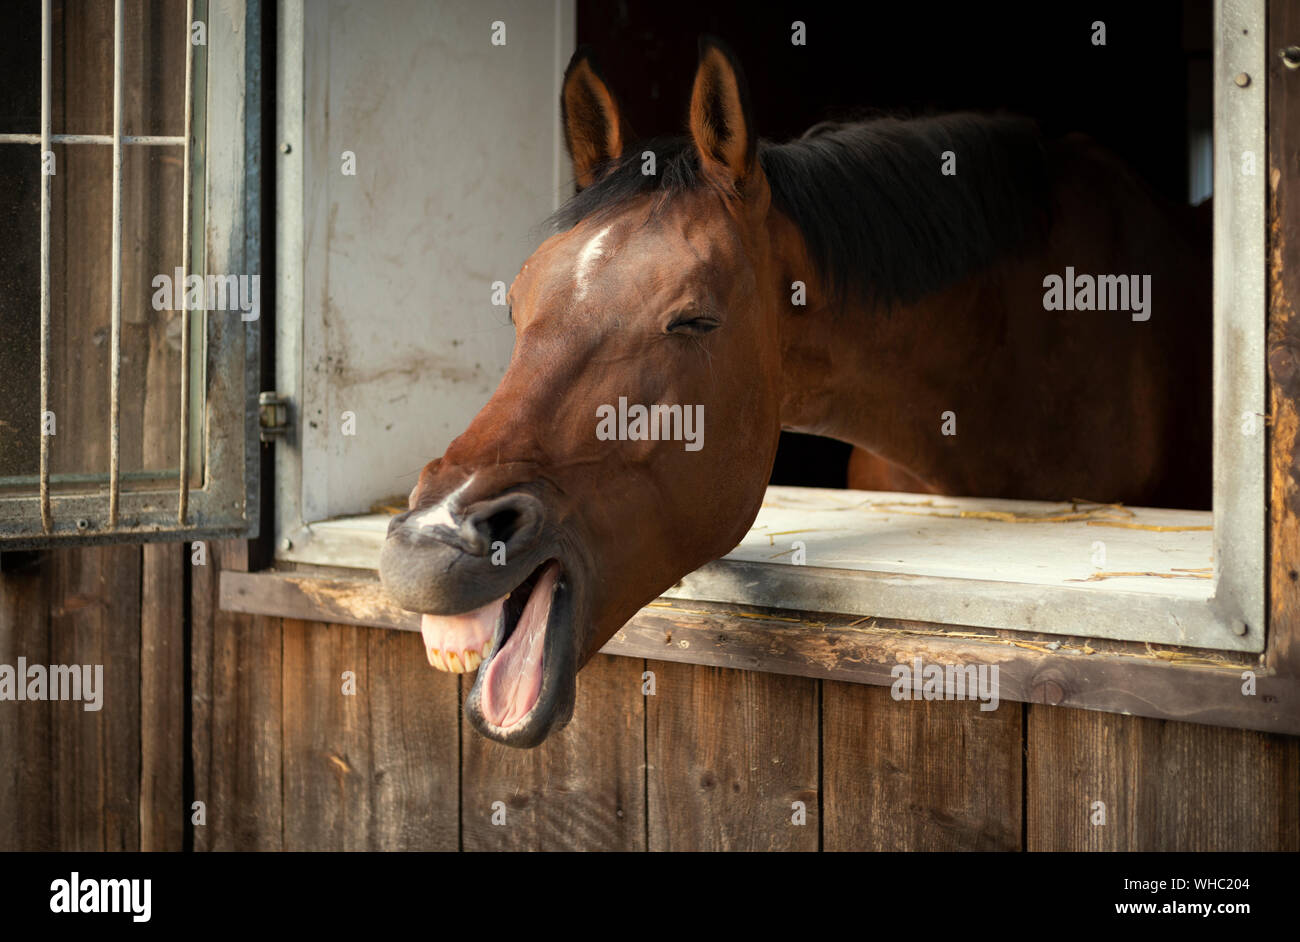 Funny horse laughing Stock Photo